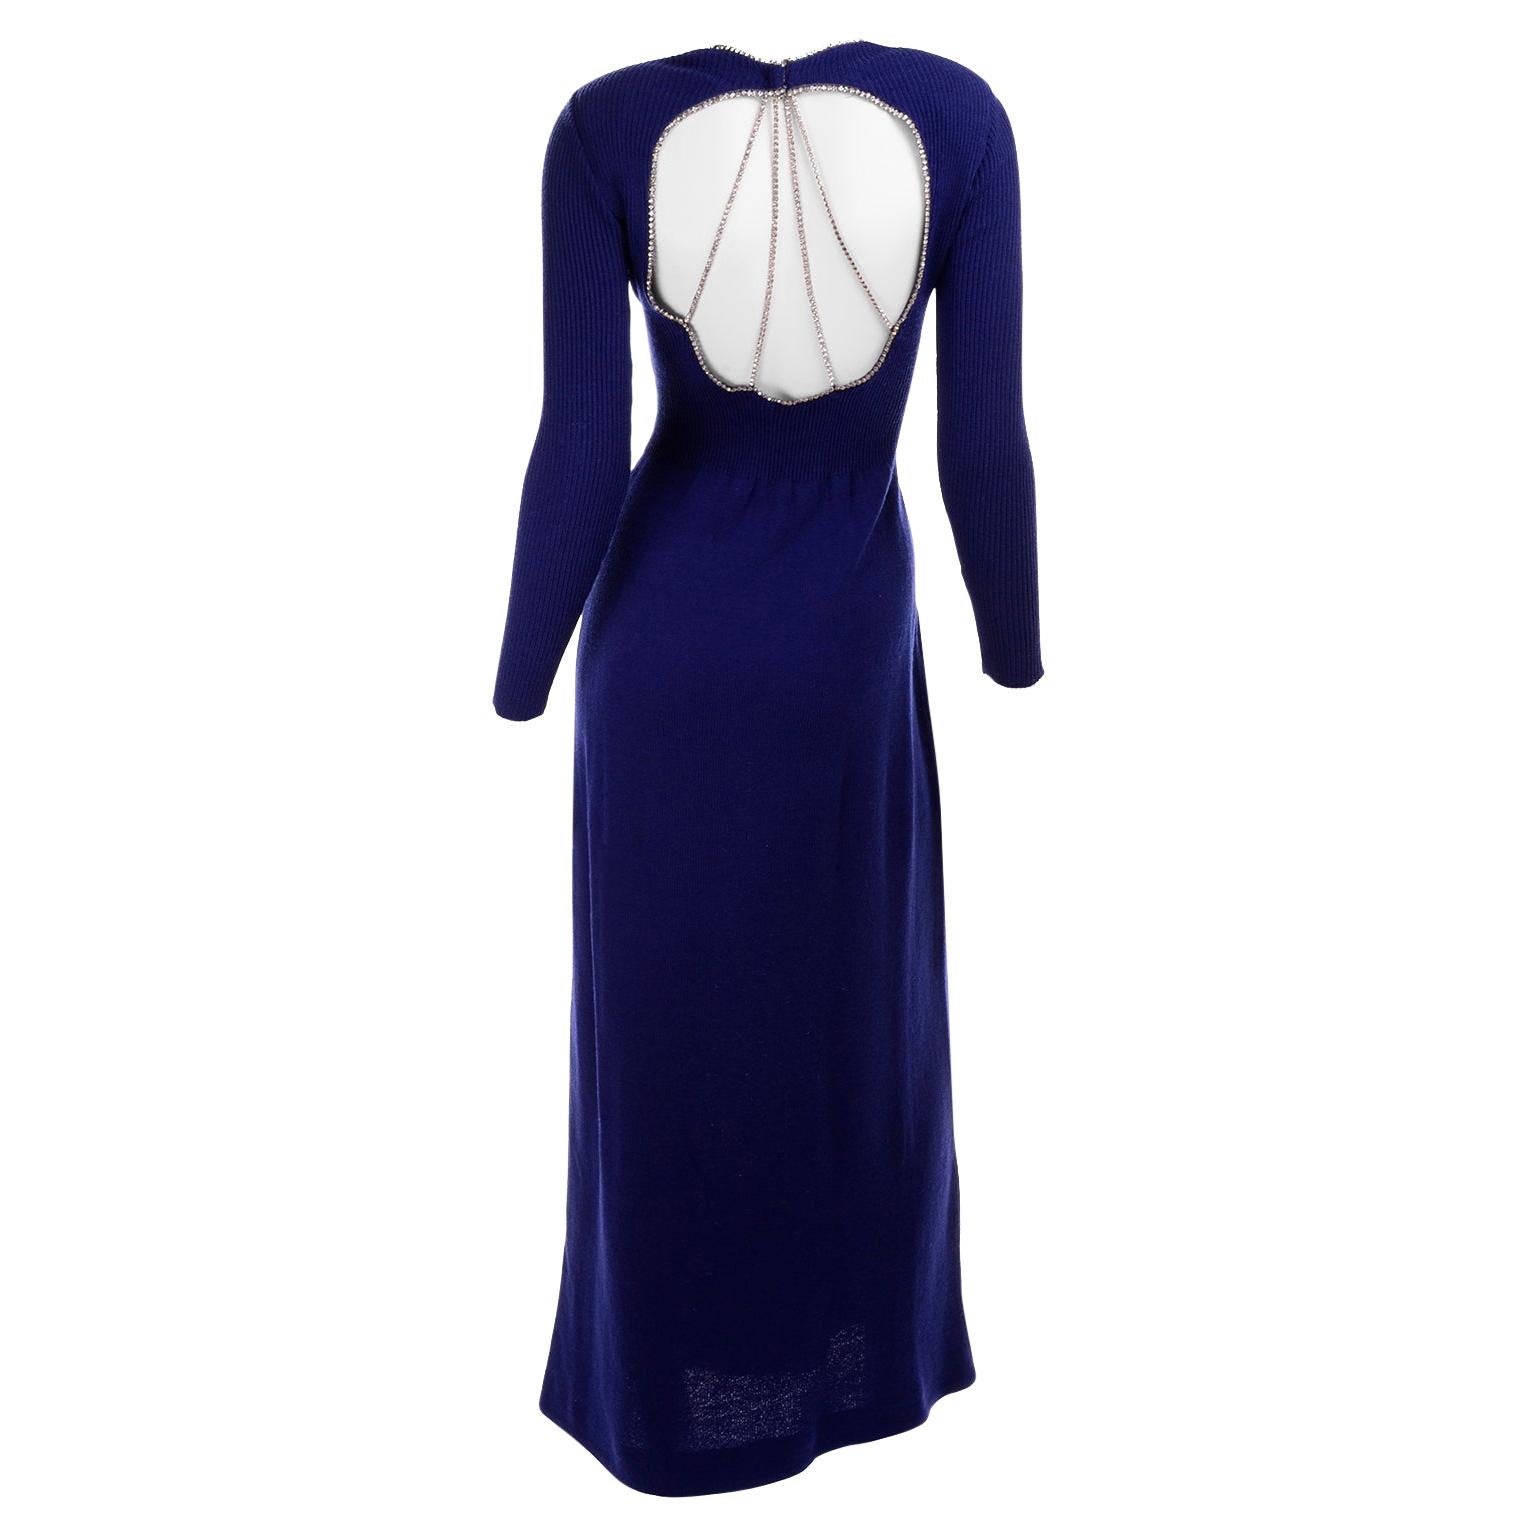 Vintage 1970s Blue Knit Evening Dress With Open Back and Rhinestones For Sale